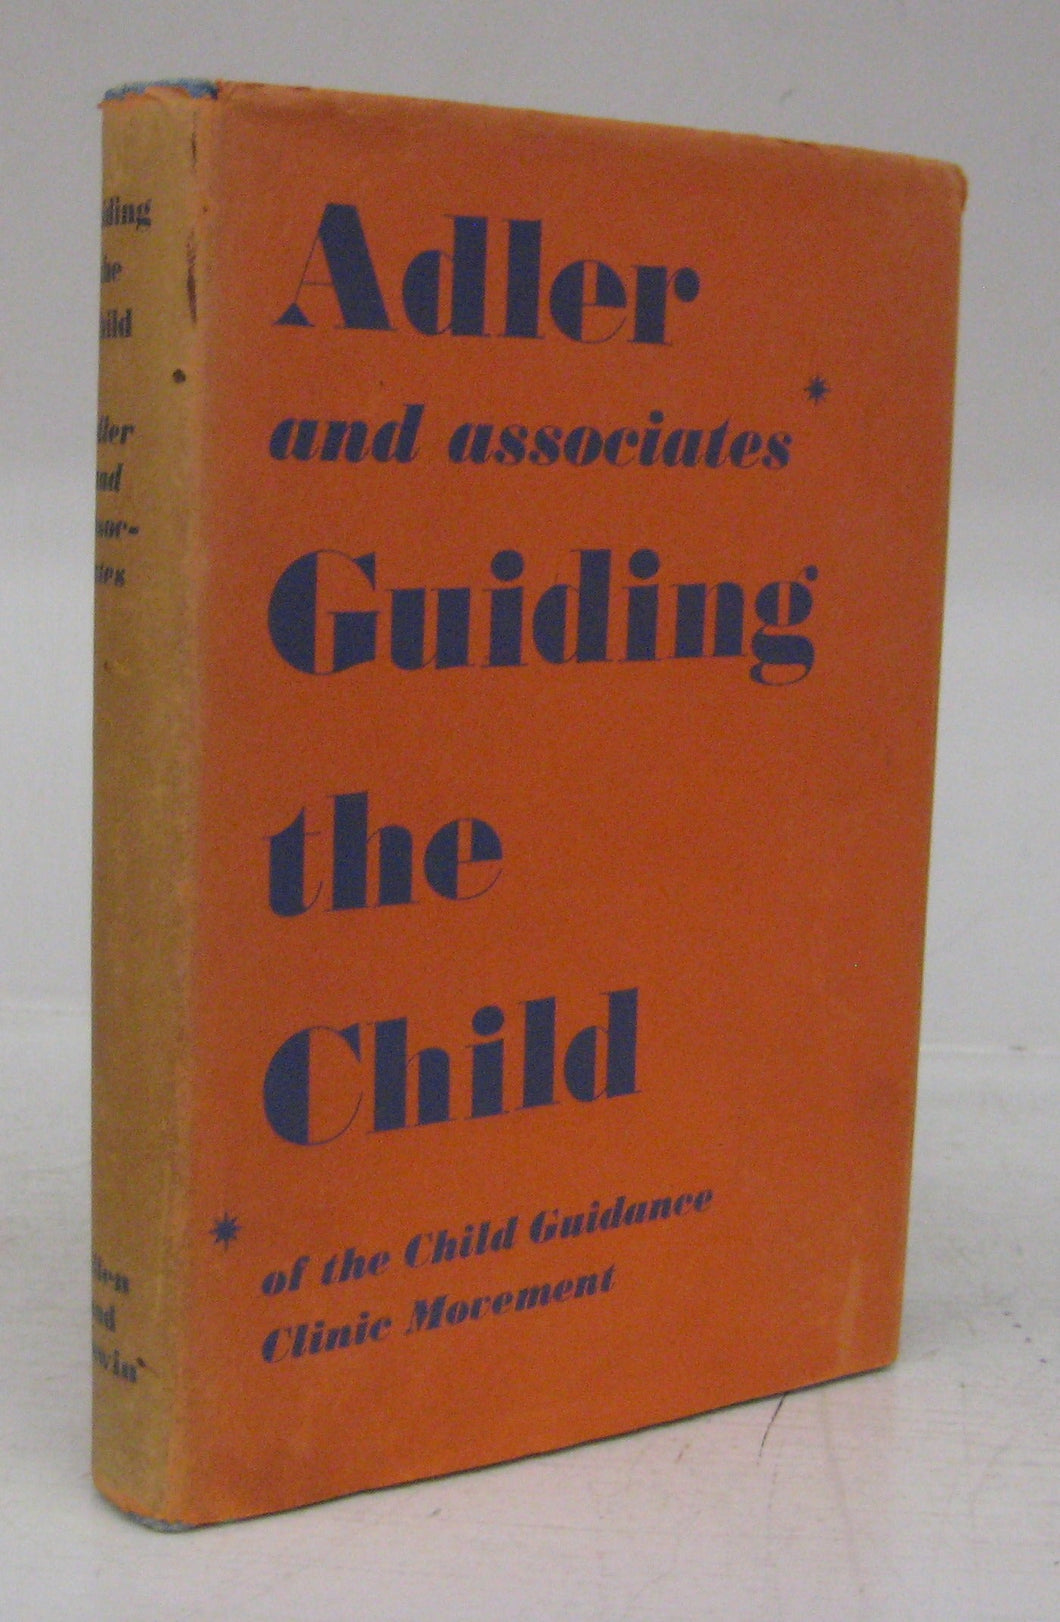 Guiding the Child on the Principles of Individual Psychology